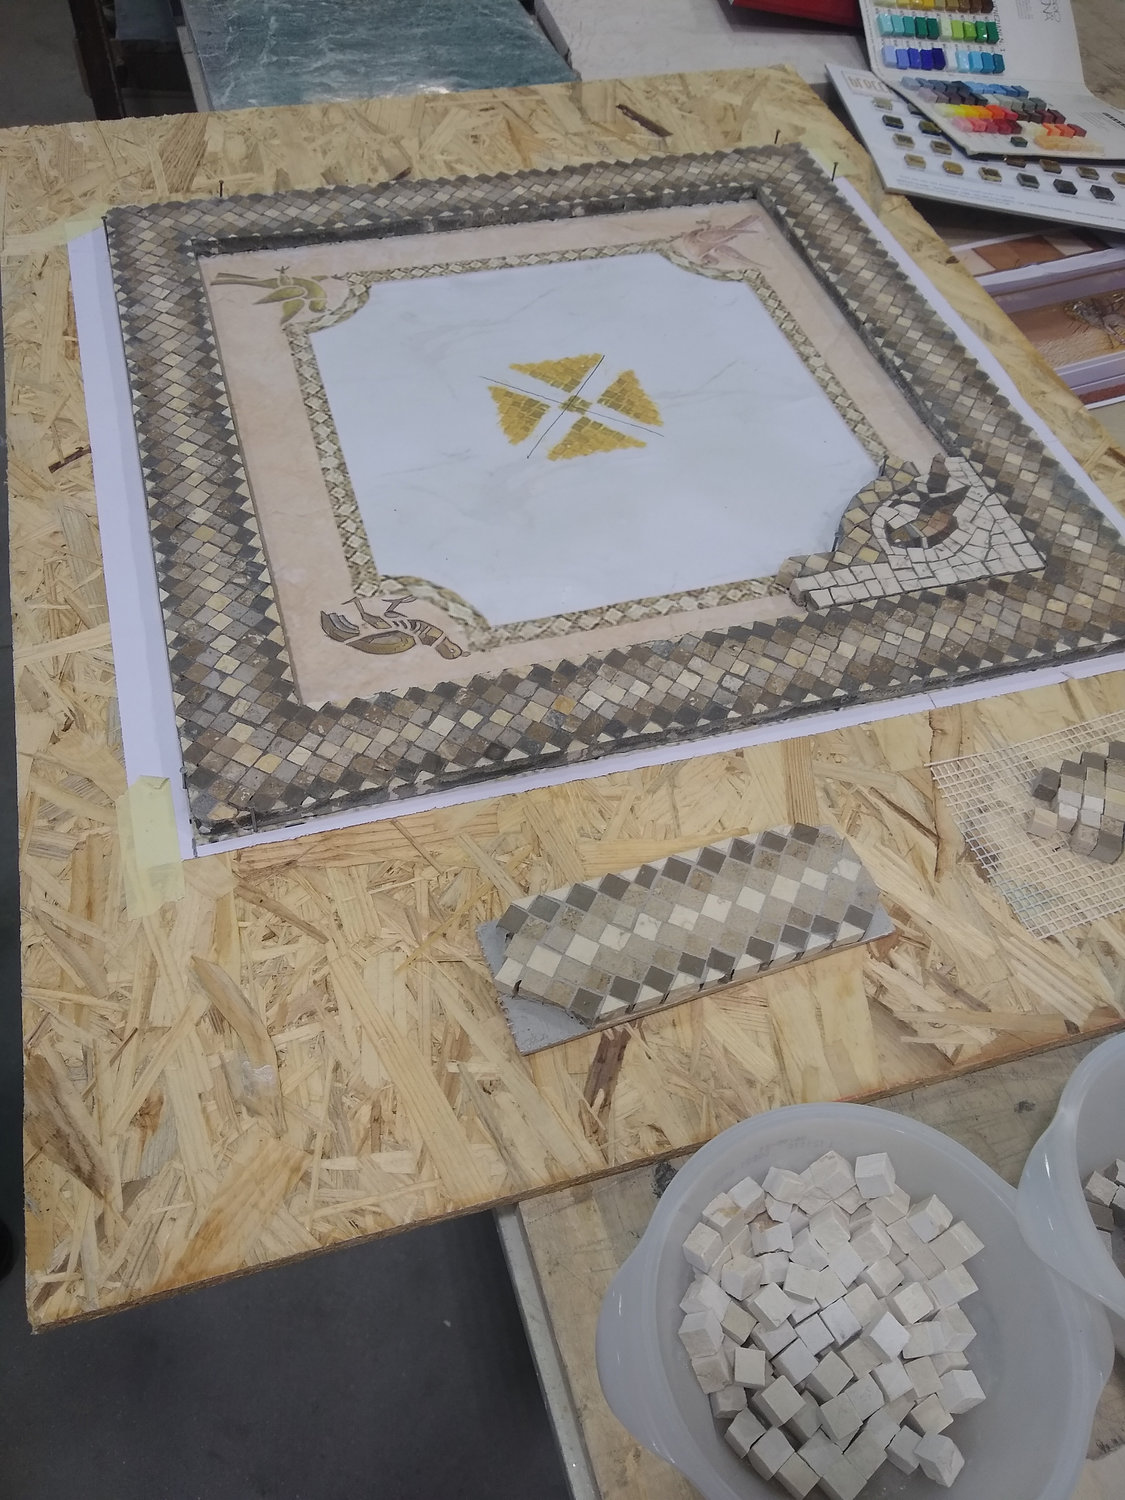 These are facets of the new altar as it is being built in Italy.